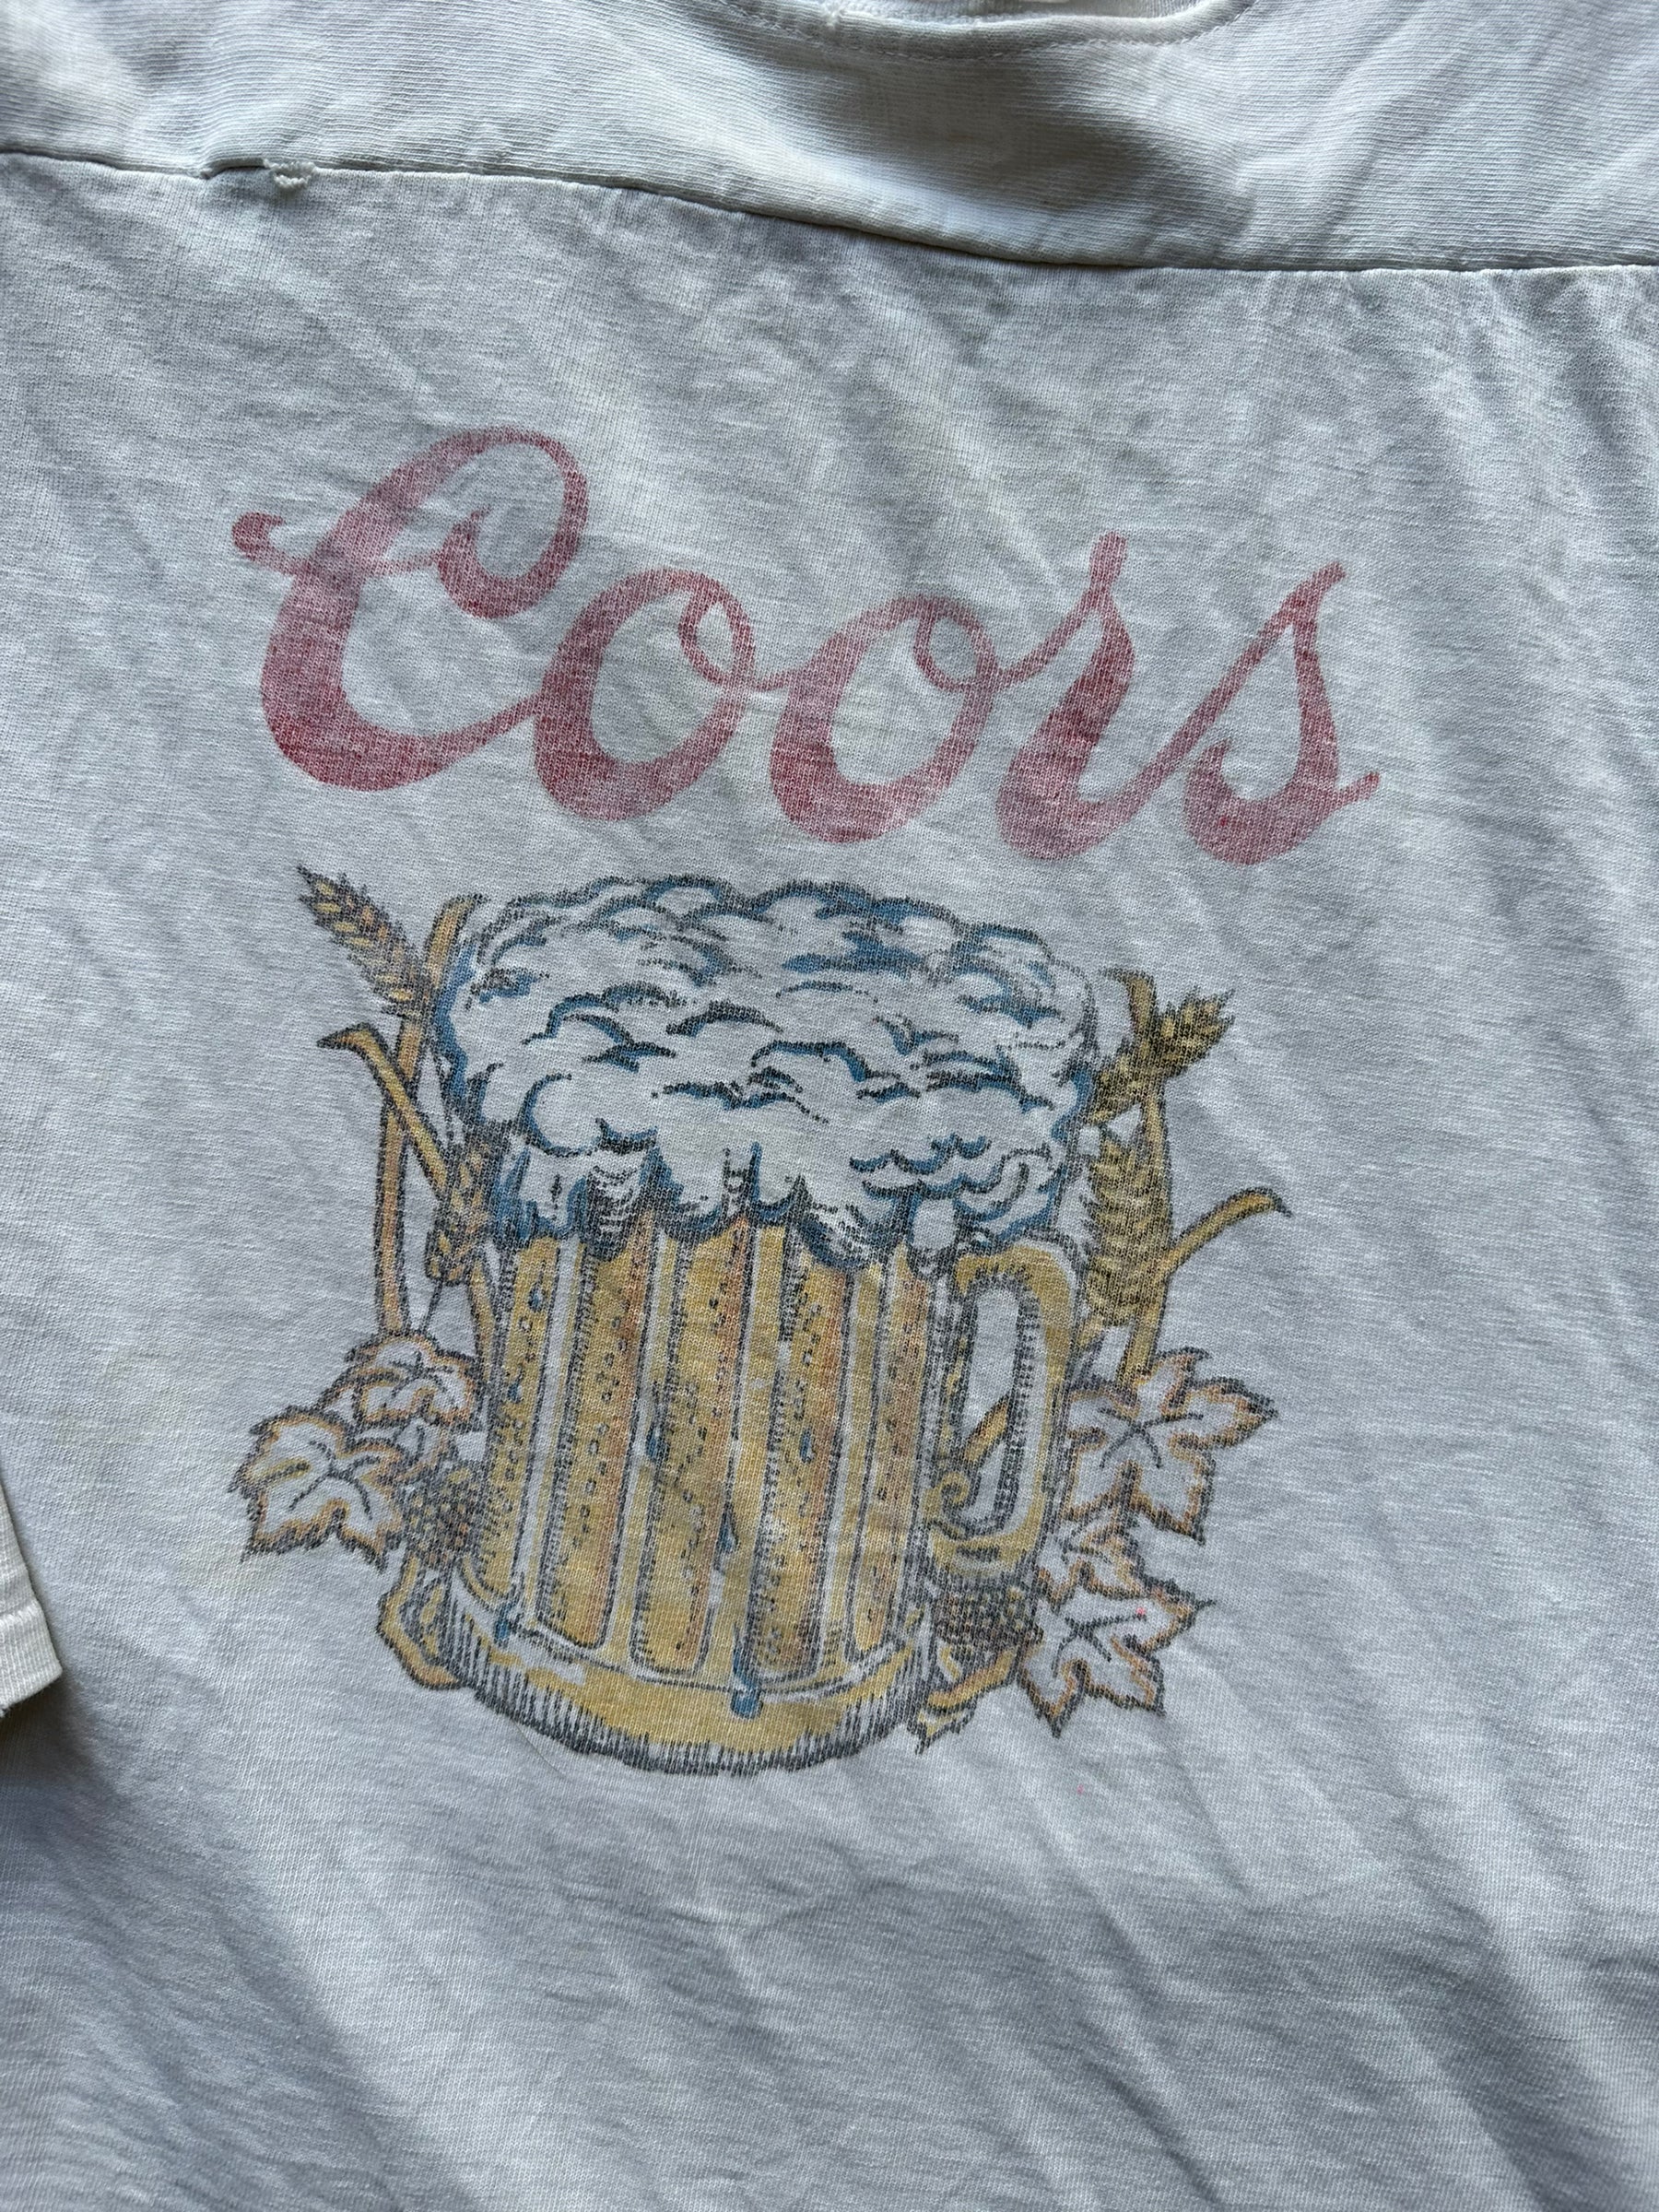 Graphic Detail on Vintage Coors Jersey Tee SZ M | Vintage Beer T-Shirts Seattle | Barn Owl Vintage Tees Seattle